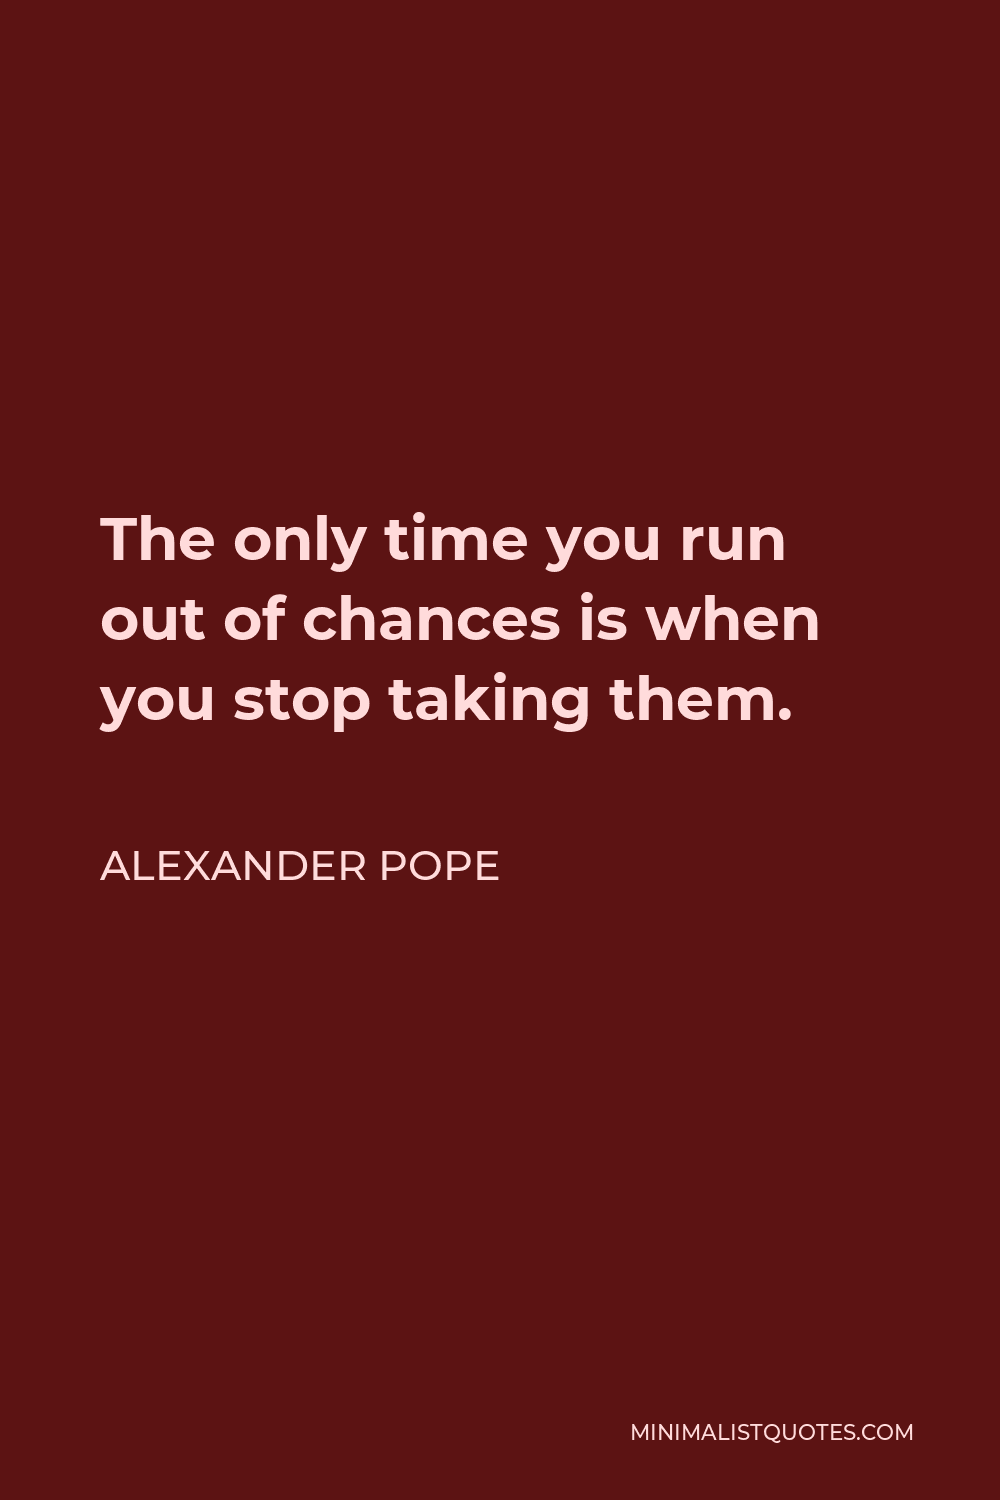 Alexander Pope Quote - The only time you run out of chances is when you stop taking them.